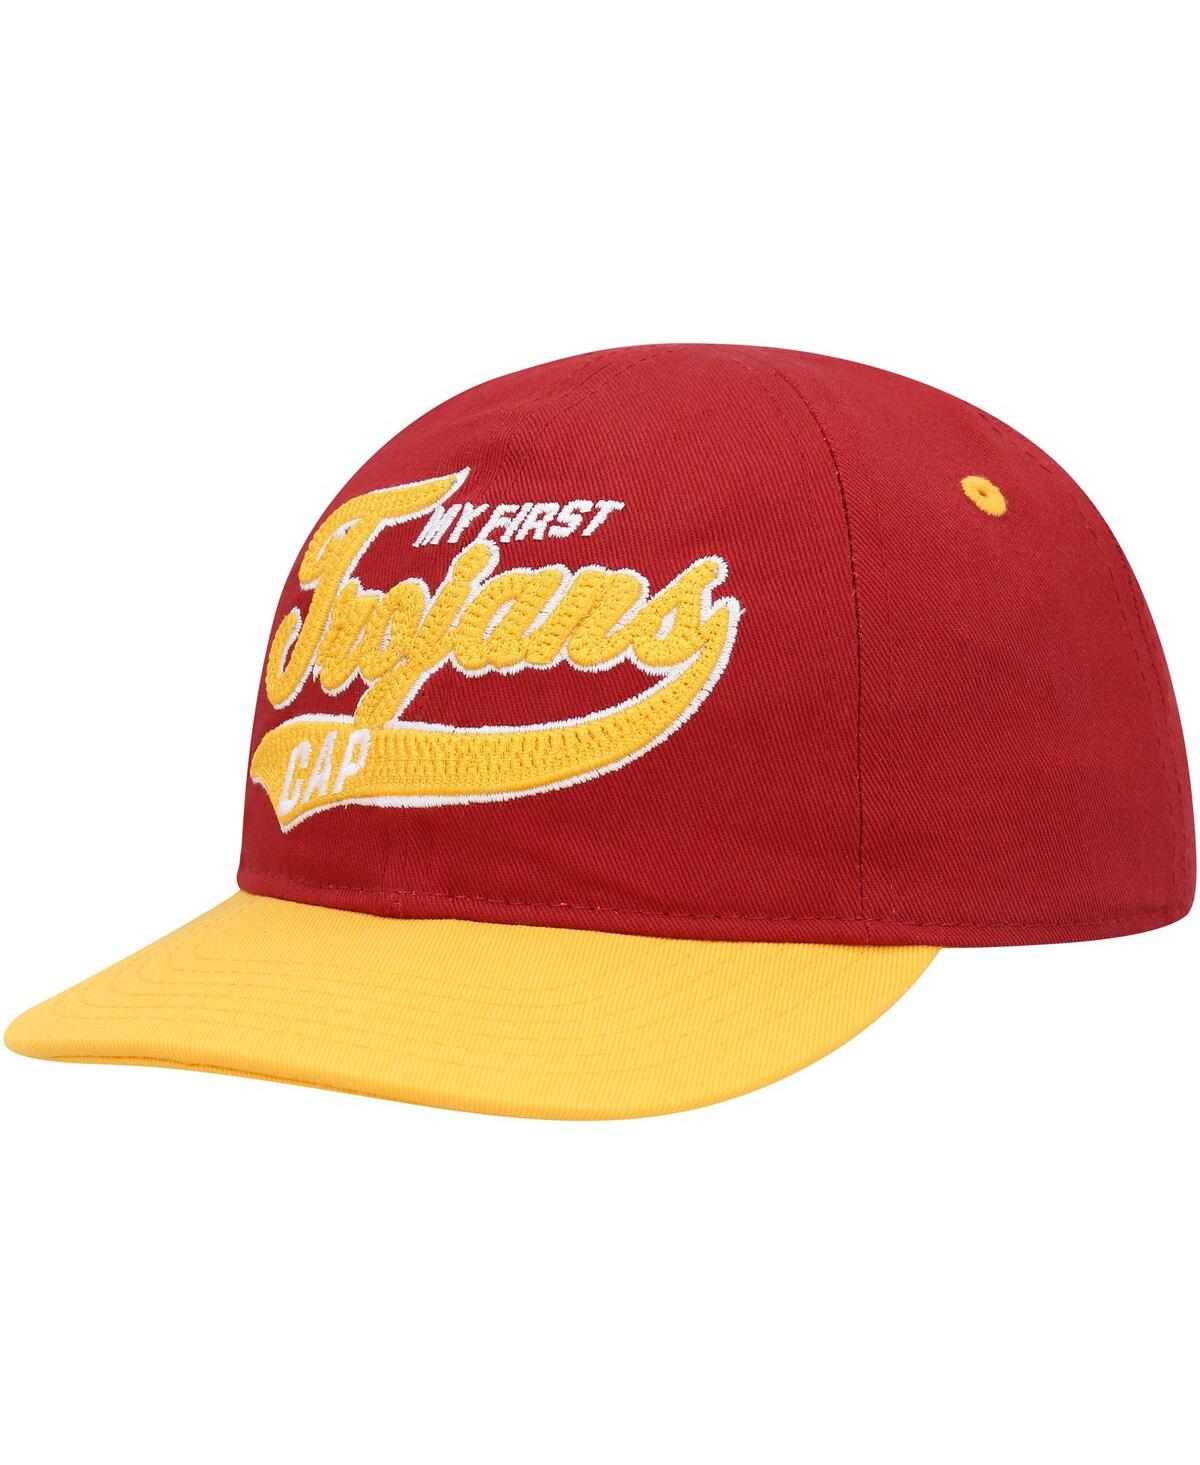 Outerstuff Babies' Infant Boys And Girls Cardinal, Gold Usc Trojans Old School Slouch Flex Hat In Cardinal,gold